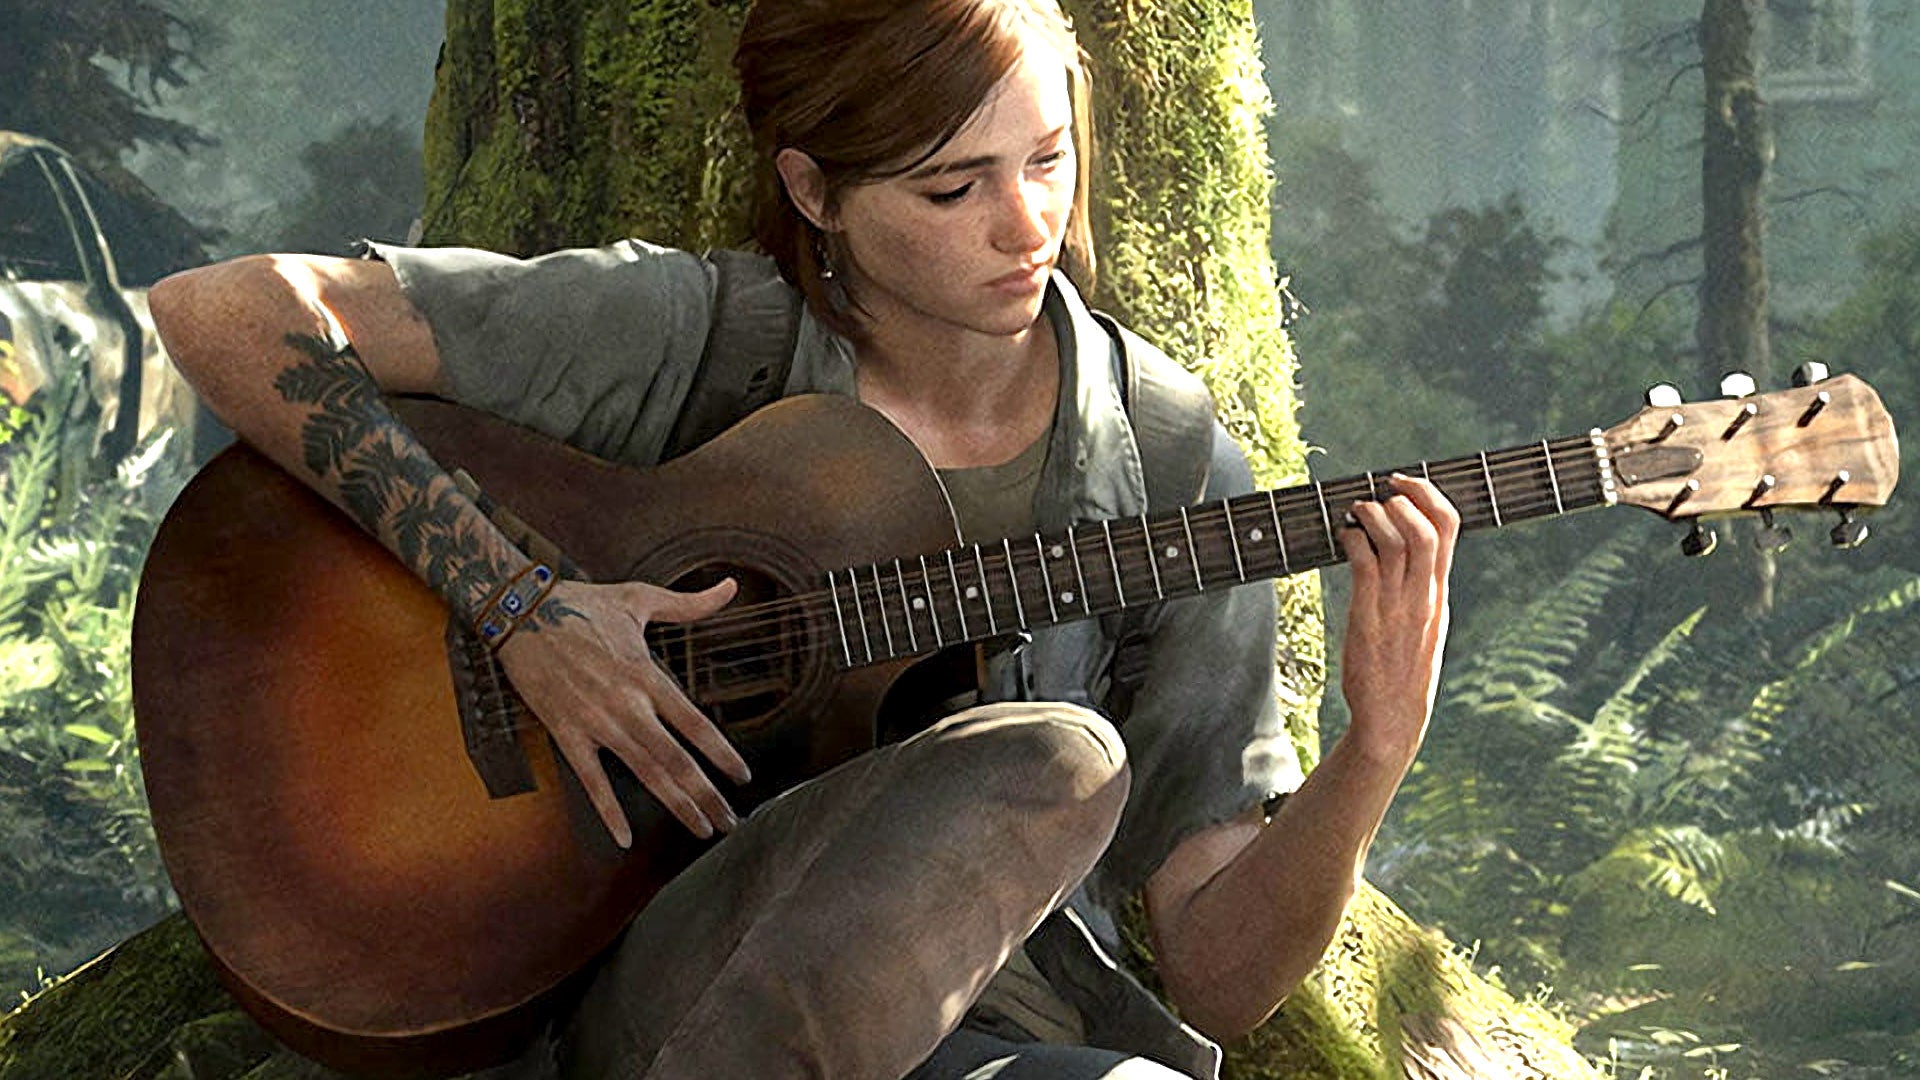 Image for Exclusive: The Last of Us Part 2 PS5 Patch - 60FPS Upgrade Tested!